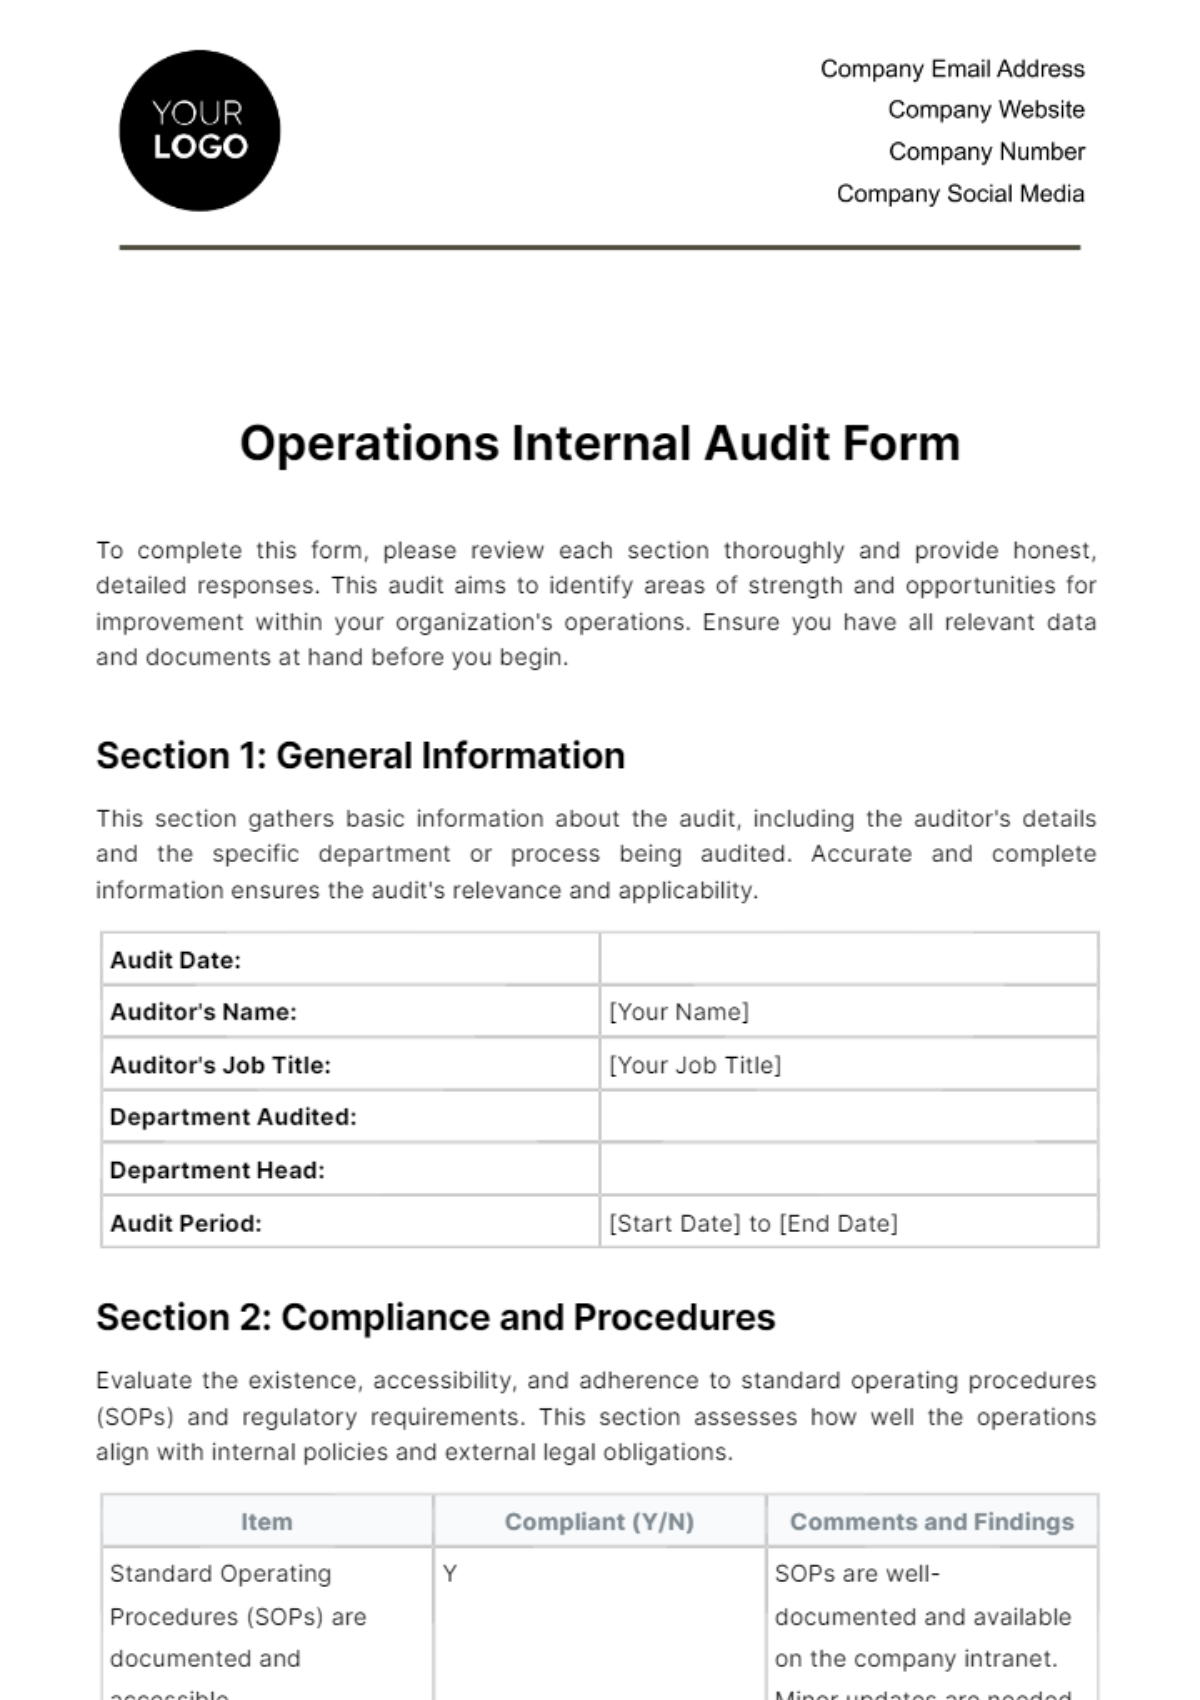 Operations Internal Audit Form Template